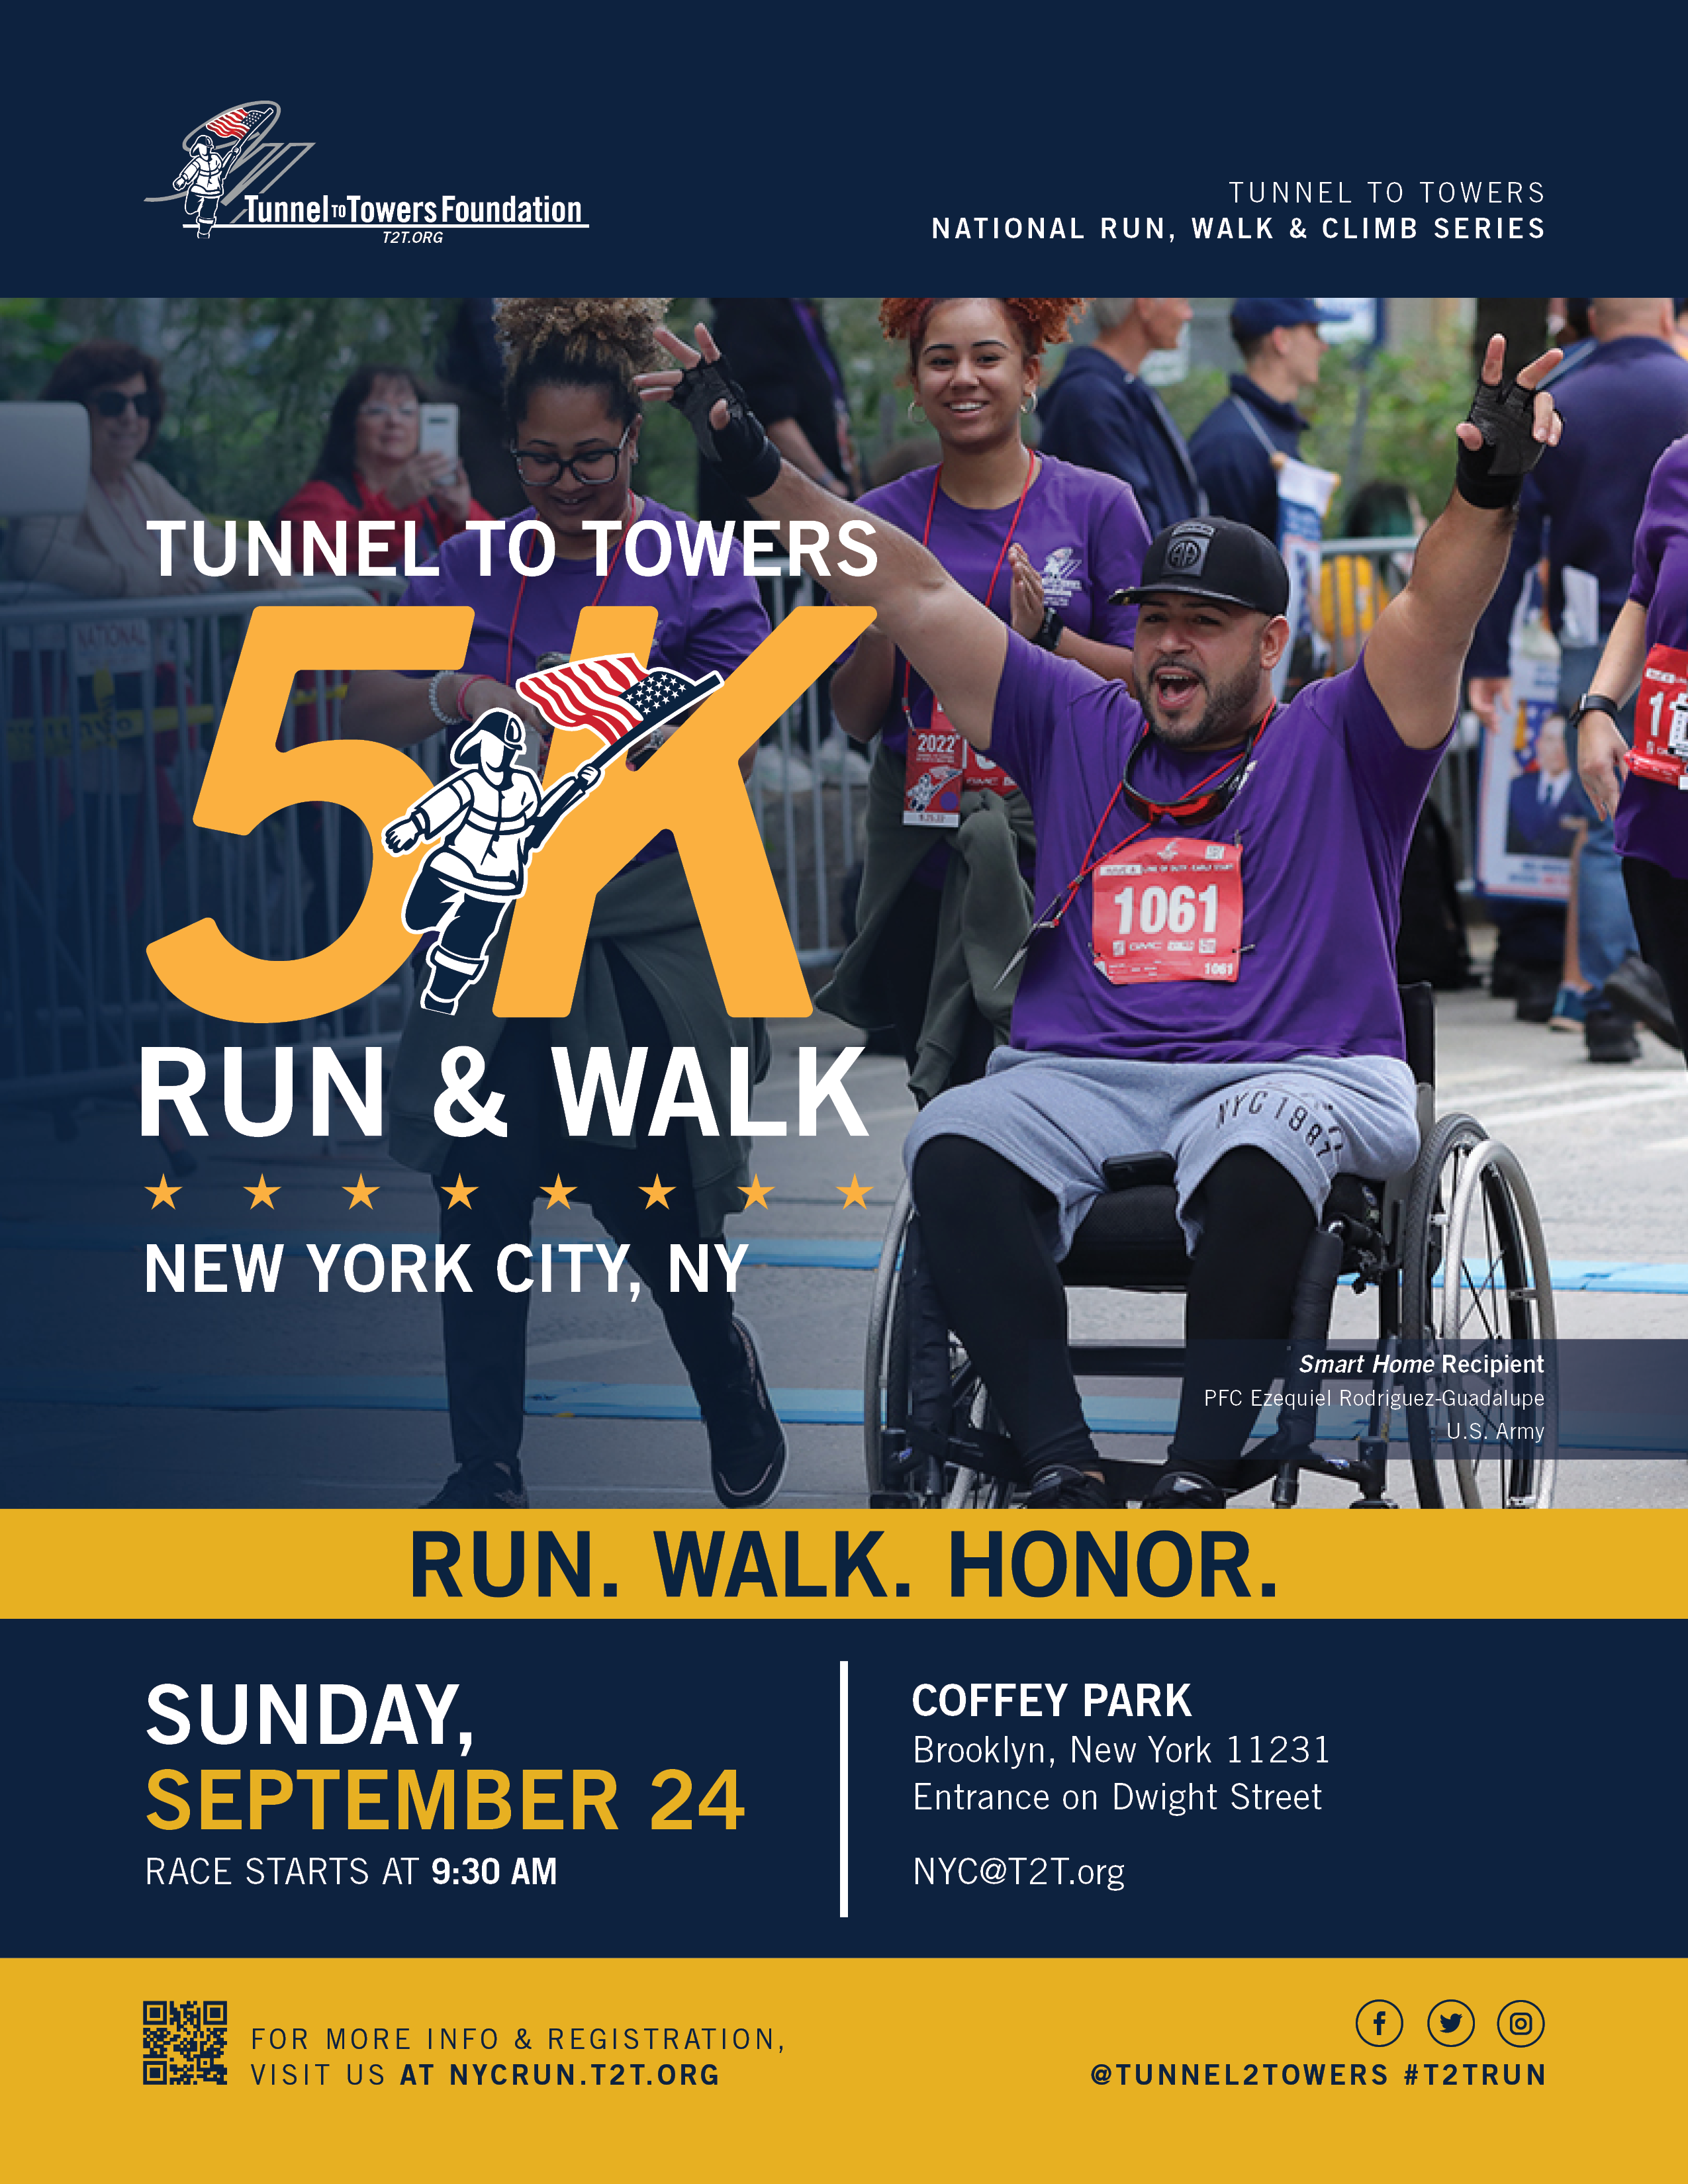 2023 Tunnel to Towers Foundation 5K Run and Walk NYC is Sunday, September 24th